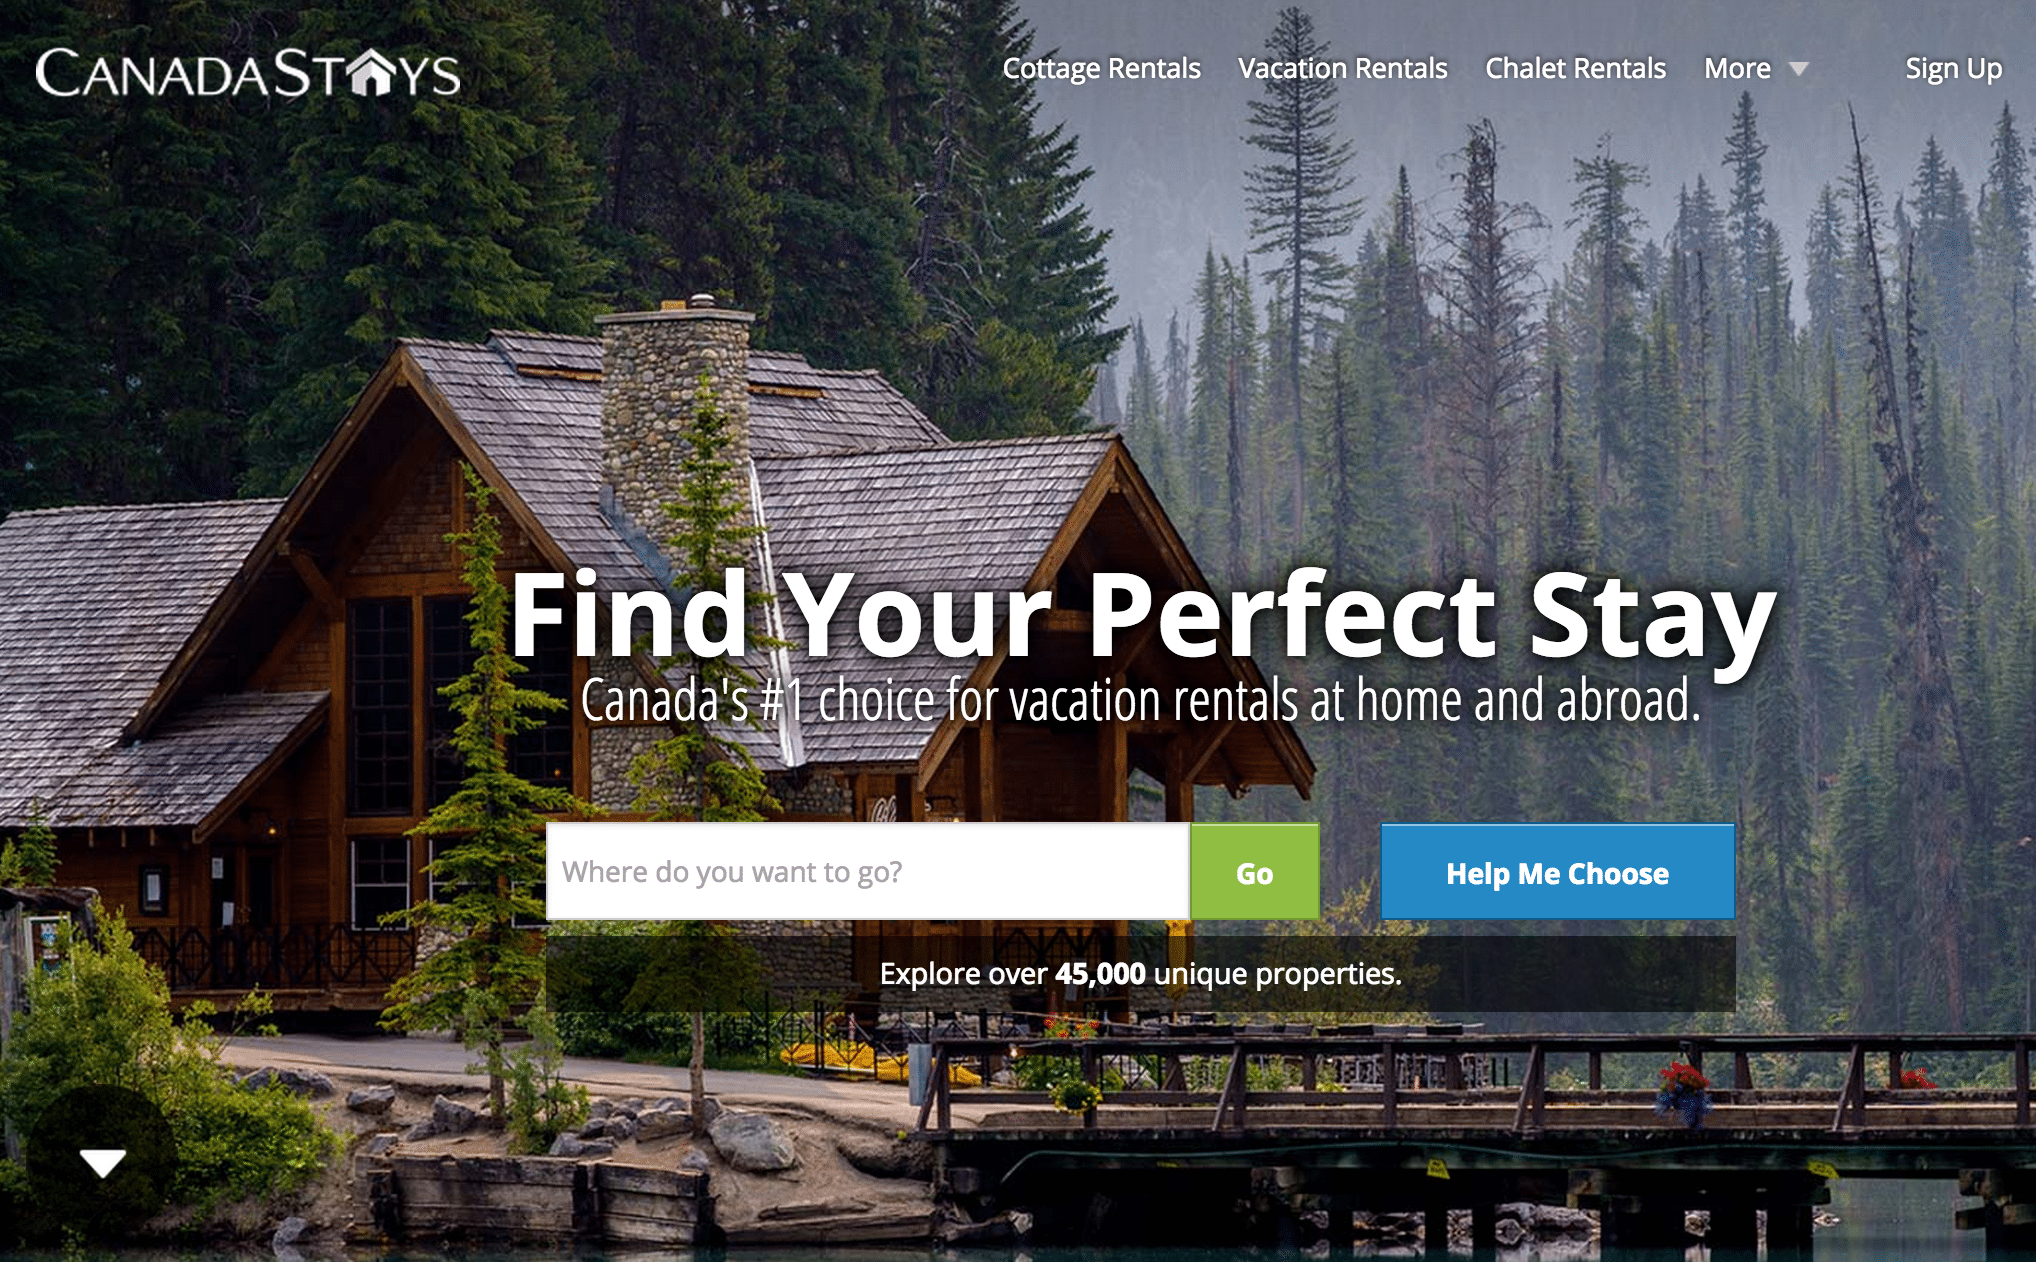 CanadaStays got $4.9 million of its new $6 million funding round from HomeAway, which will become a minority stakeholder in the Canada vacation rental site.